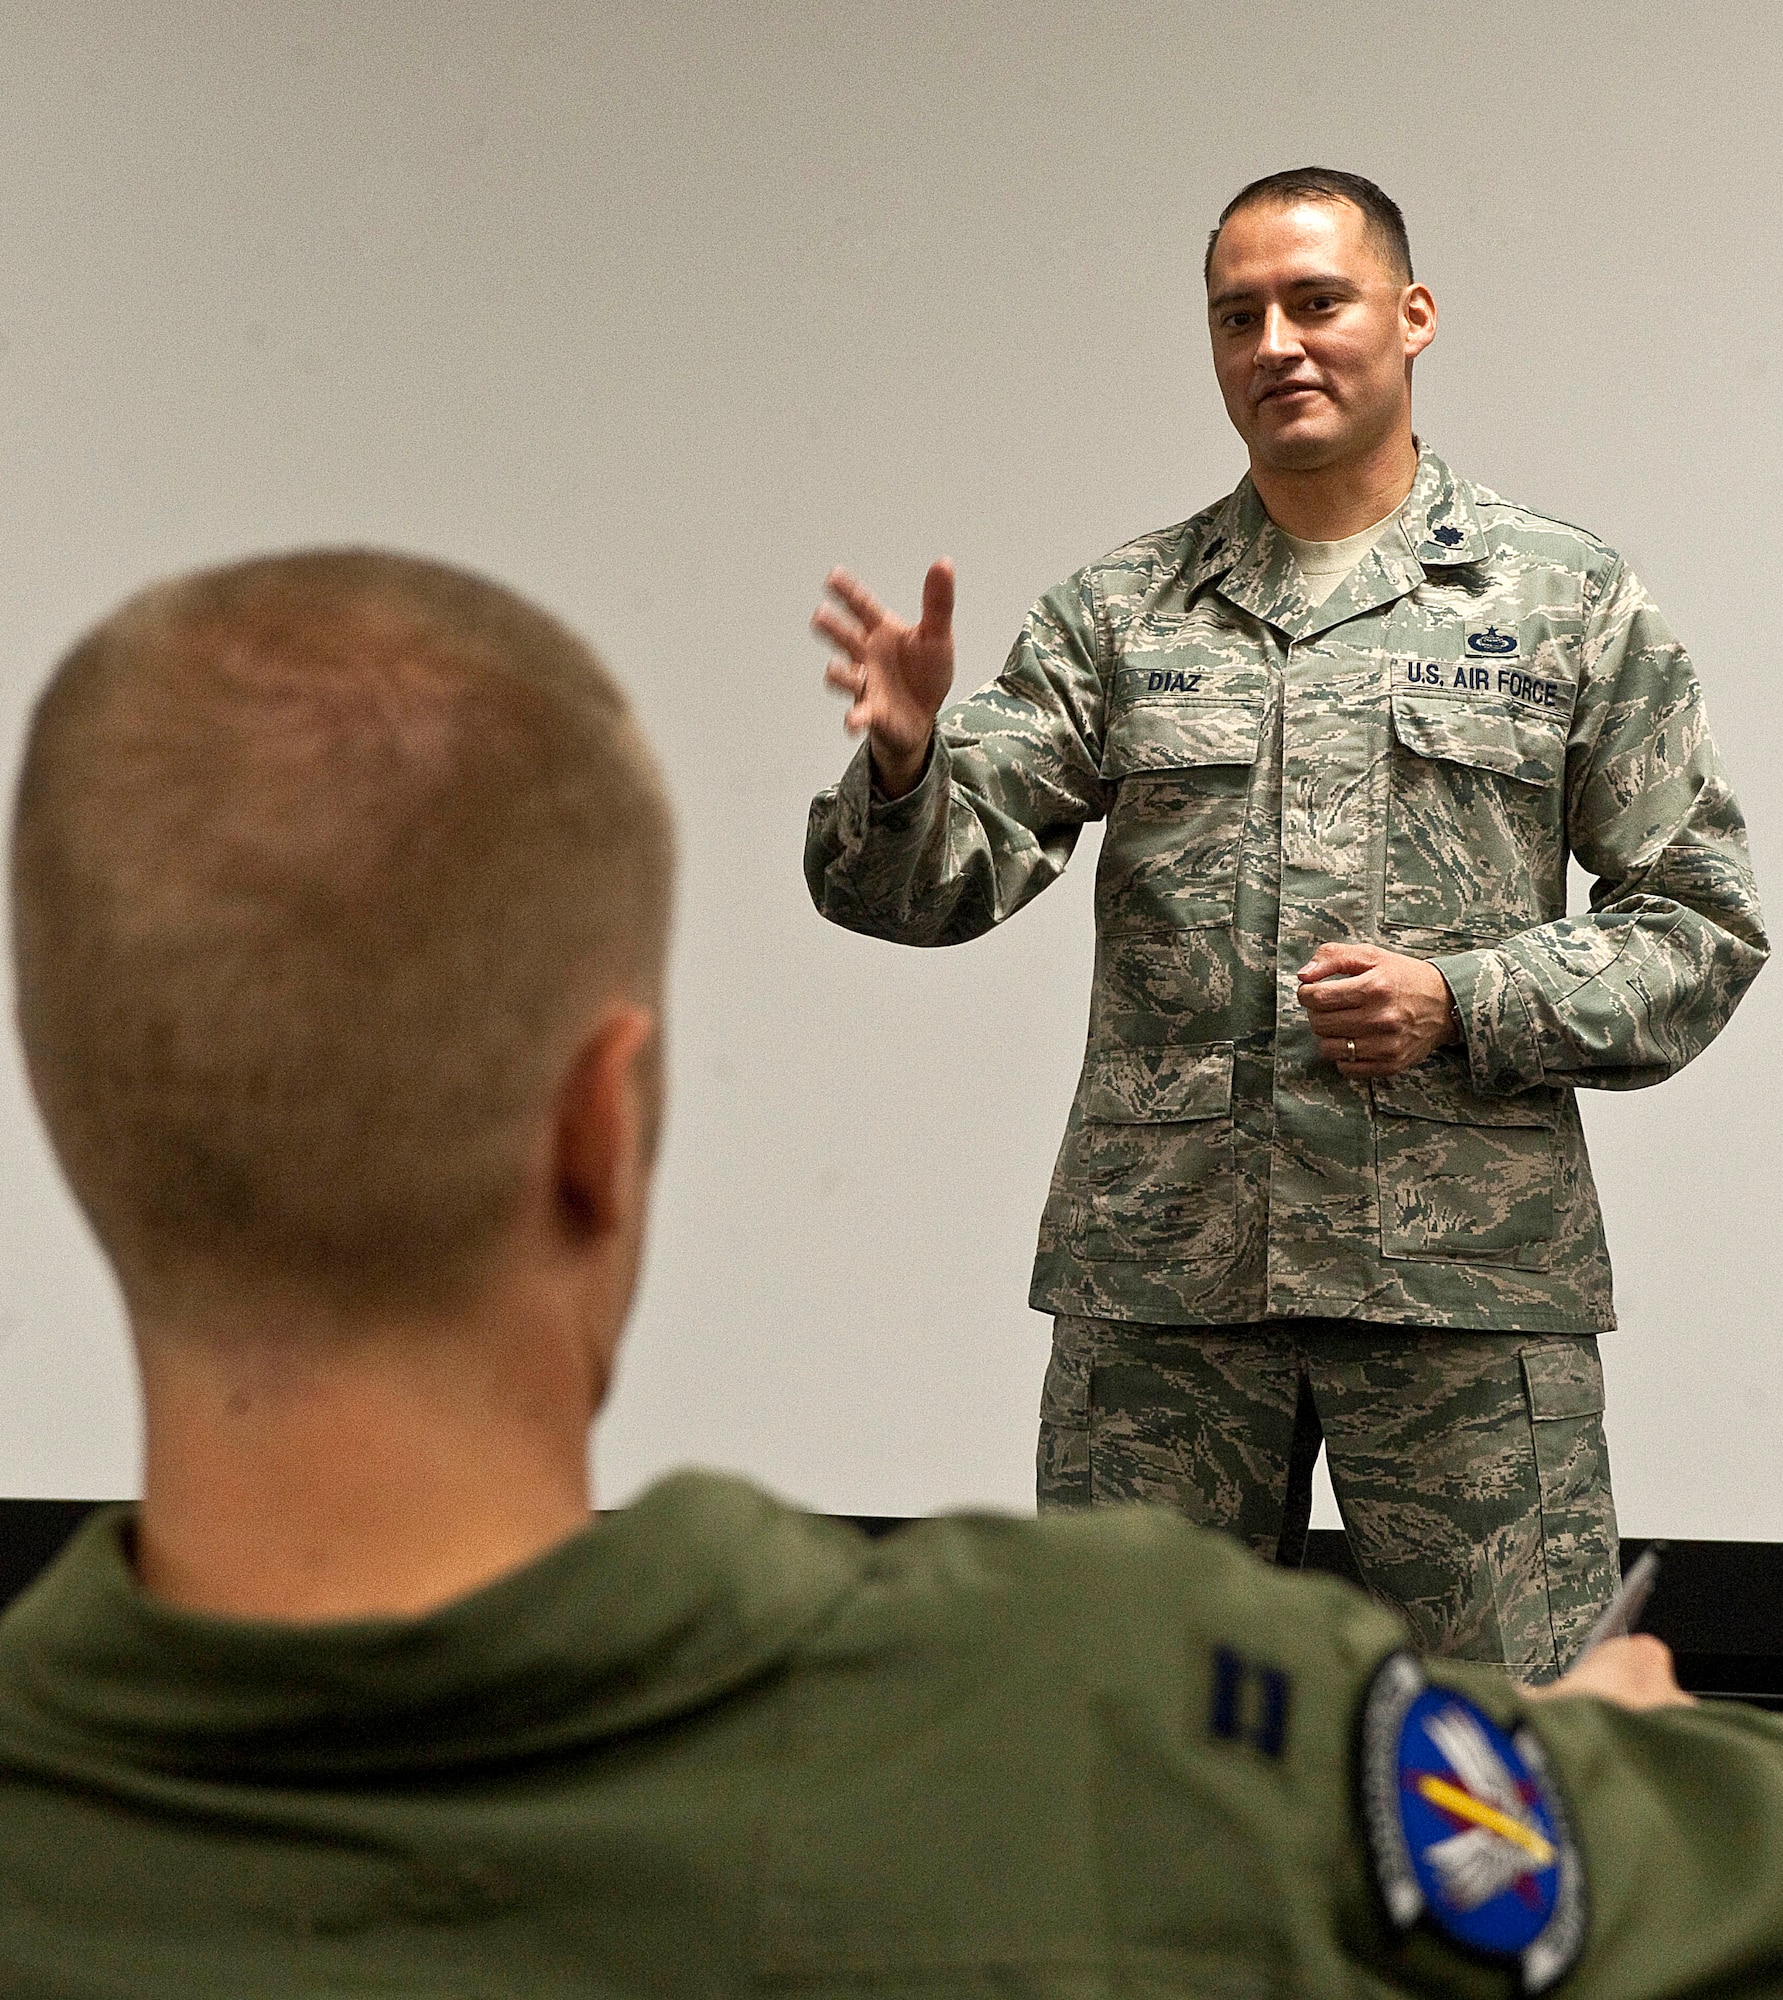 Lt. Col. Chad Diaz, 507th Air Defense Aggressor Squadron director of operations, talks about the Fighter Electronic Officer Course Oct. 5, 2012, at Nellis Air Force Base Nev. The 507th ADAS offers the Fighter Electronic Officer Course, qualifying pilots to become electronic warfare officers. (U.S. Air Force photo by Staff Sgt. Christopher Hubenthal)
